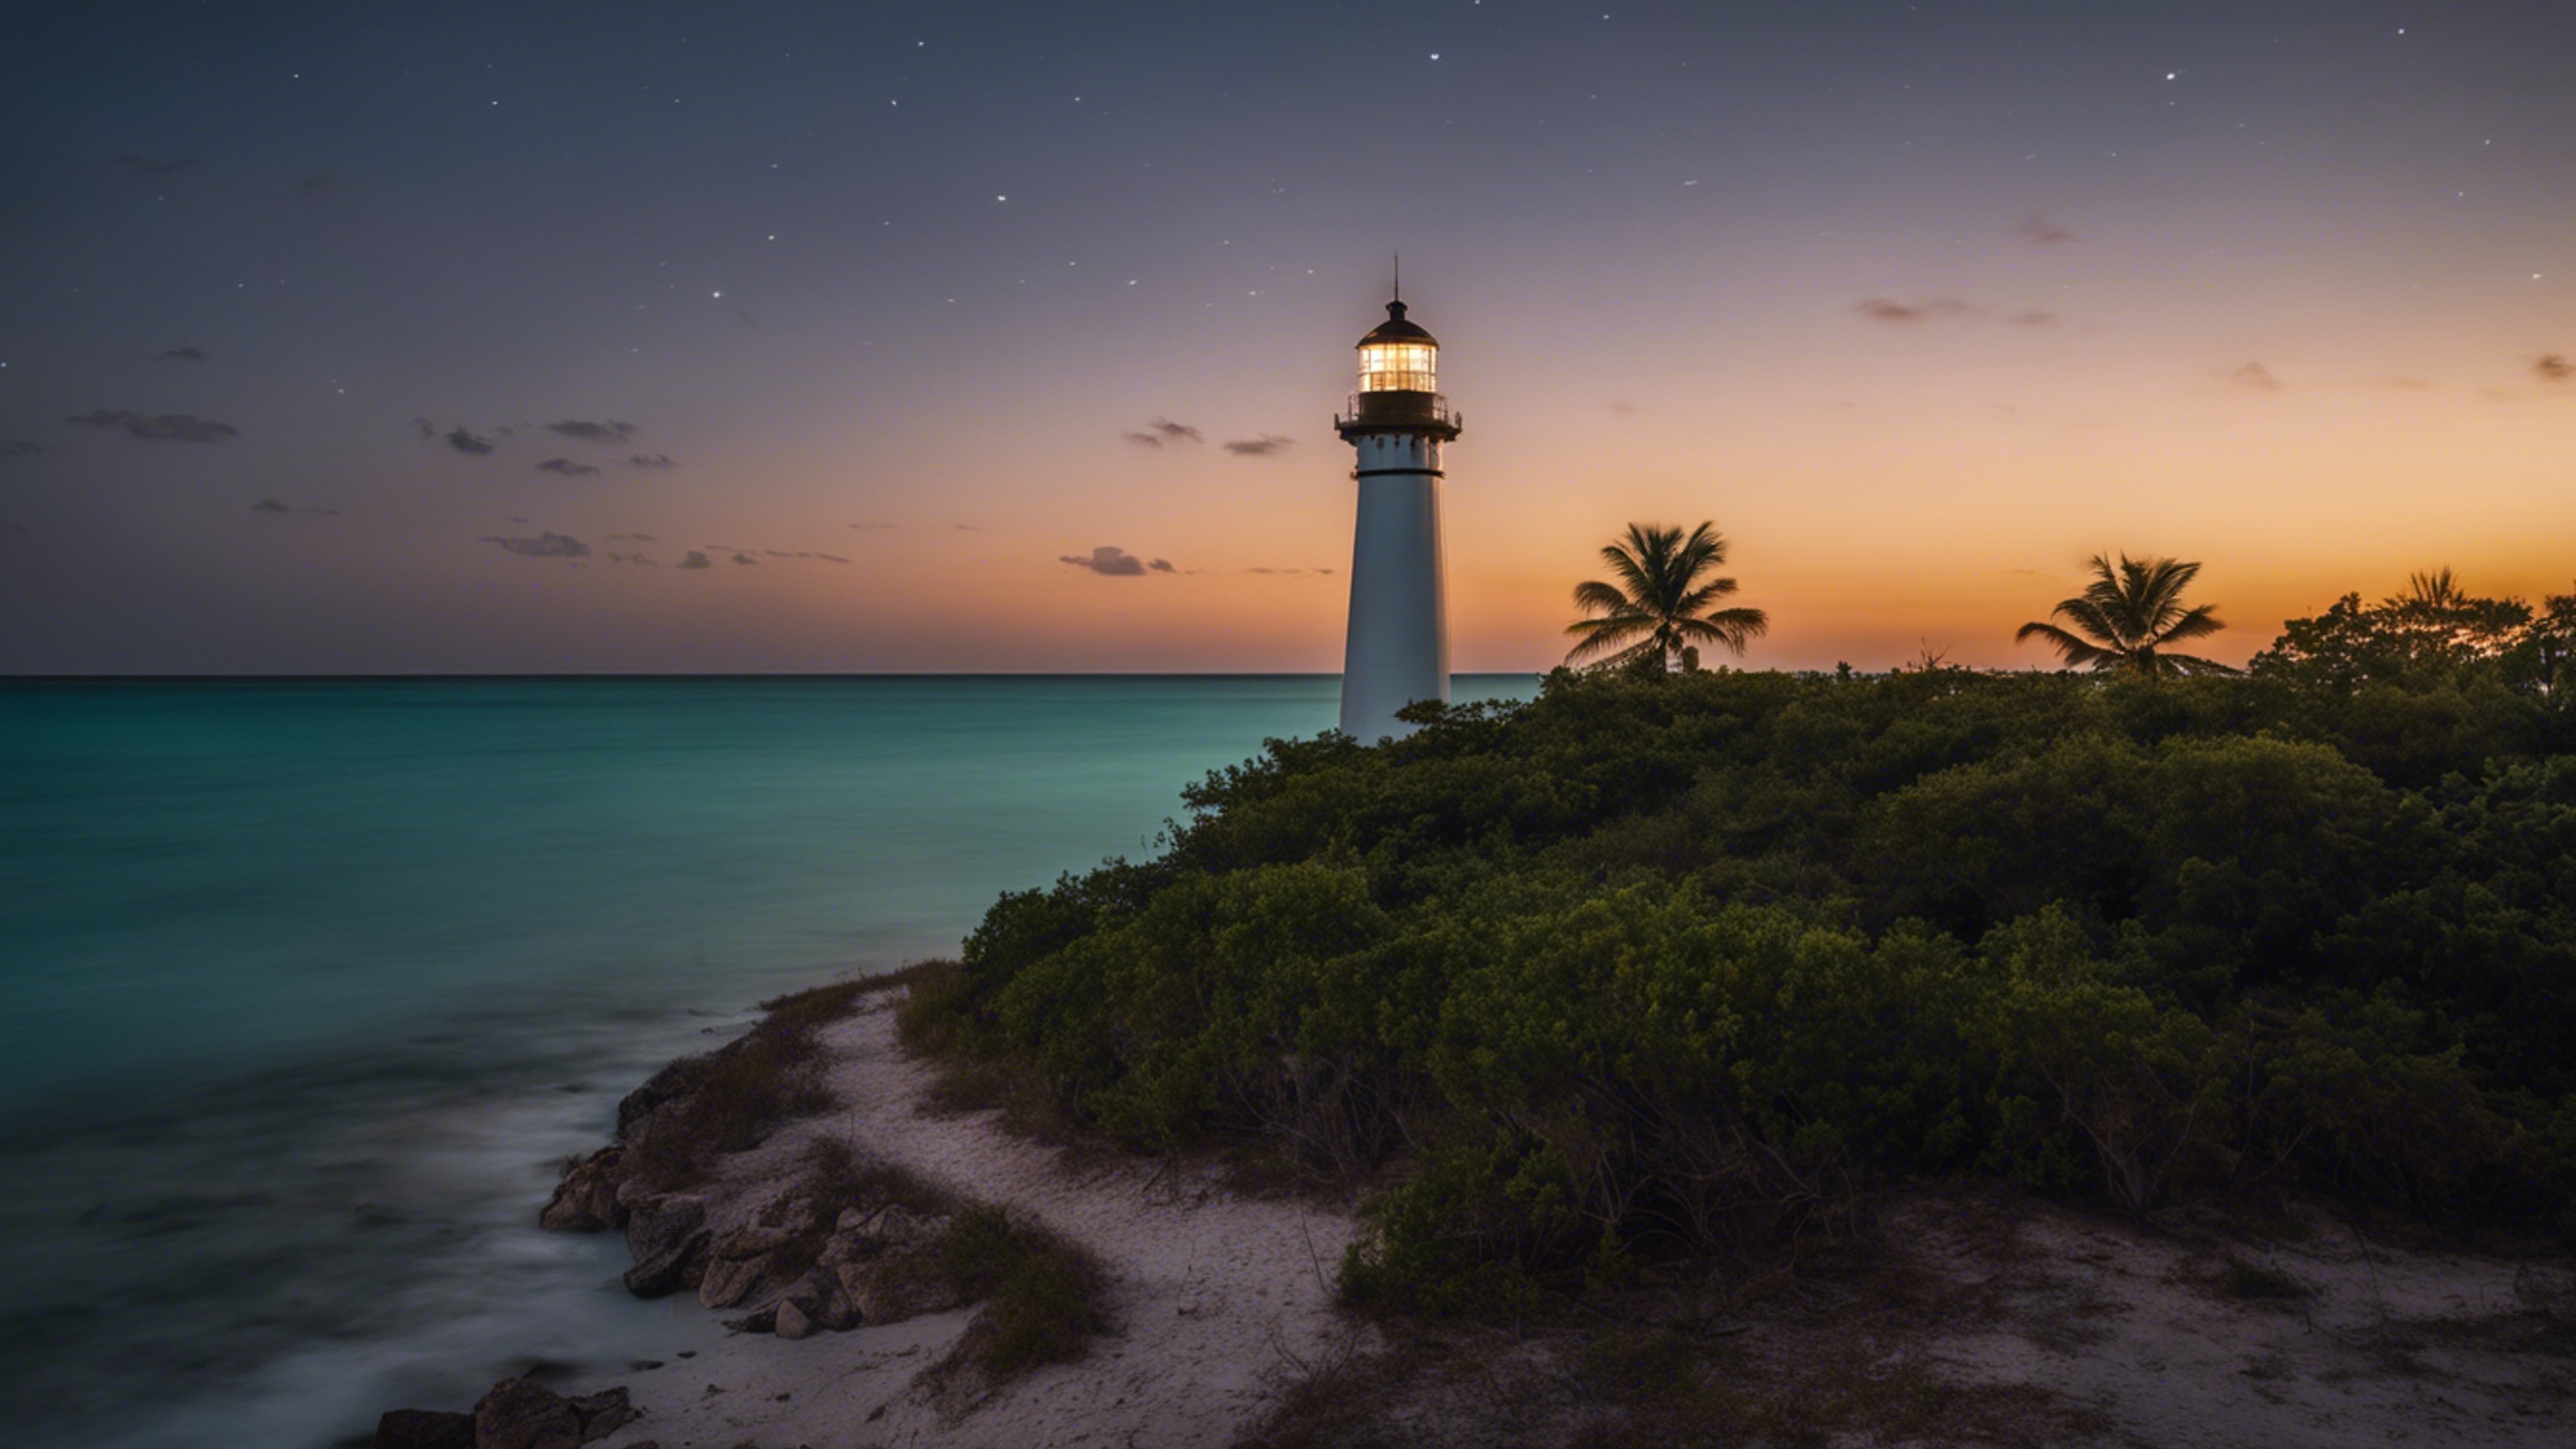 A night shot of an historic lighthouse in Key Biscayne, with the beam of light cutting through the darkness. Fondo de pantalla[4d5993bb763c4a90b239]